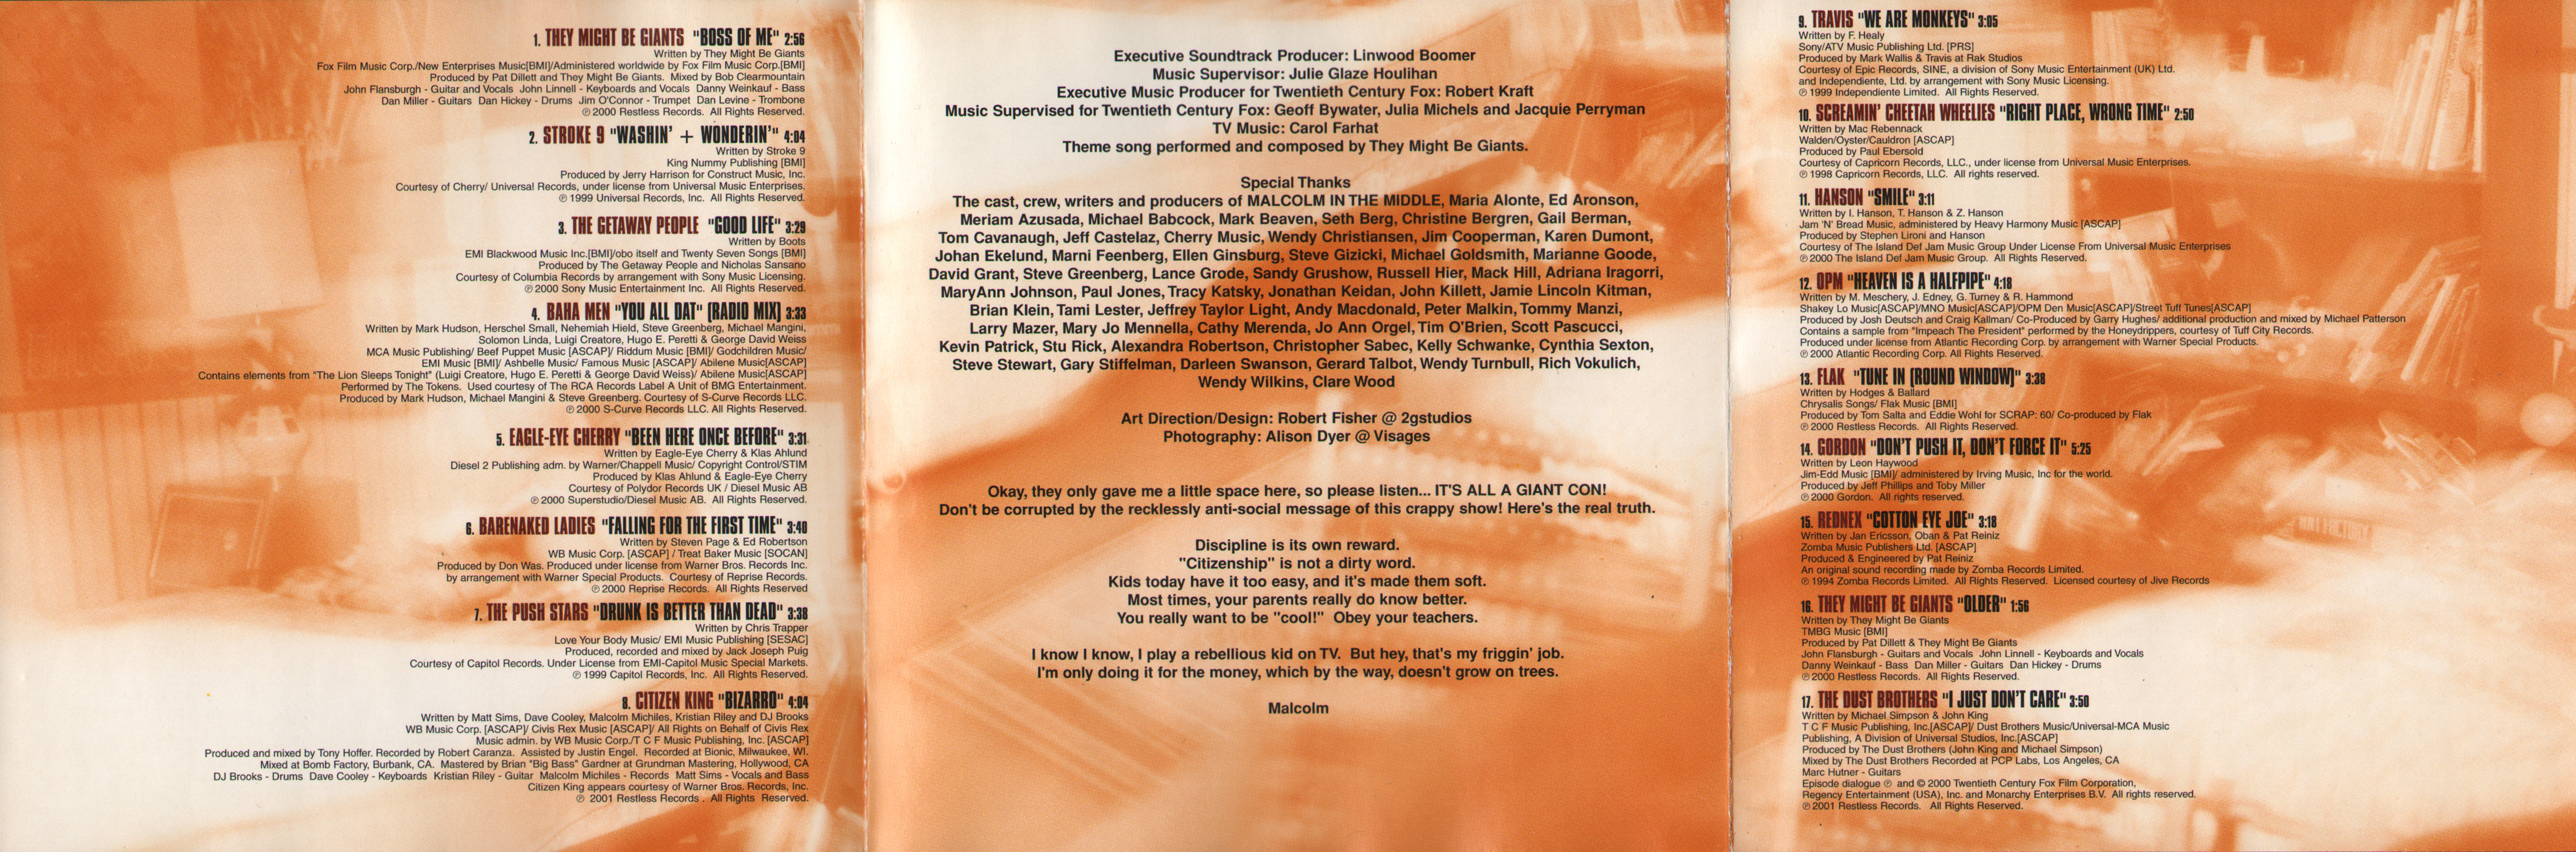 Music from Malcolm in the Middle - Soundtrack - CD - Booklet Back